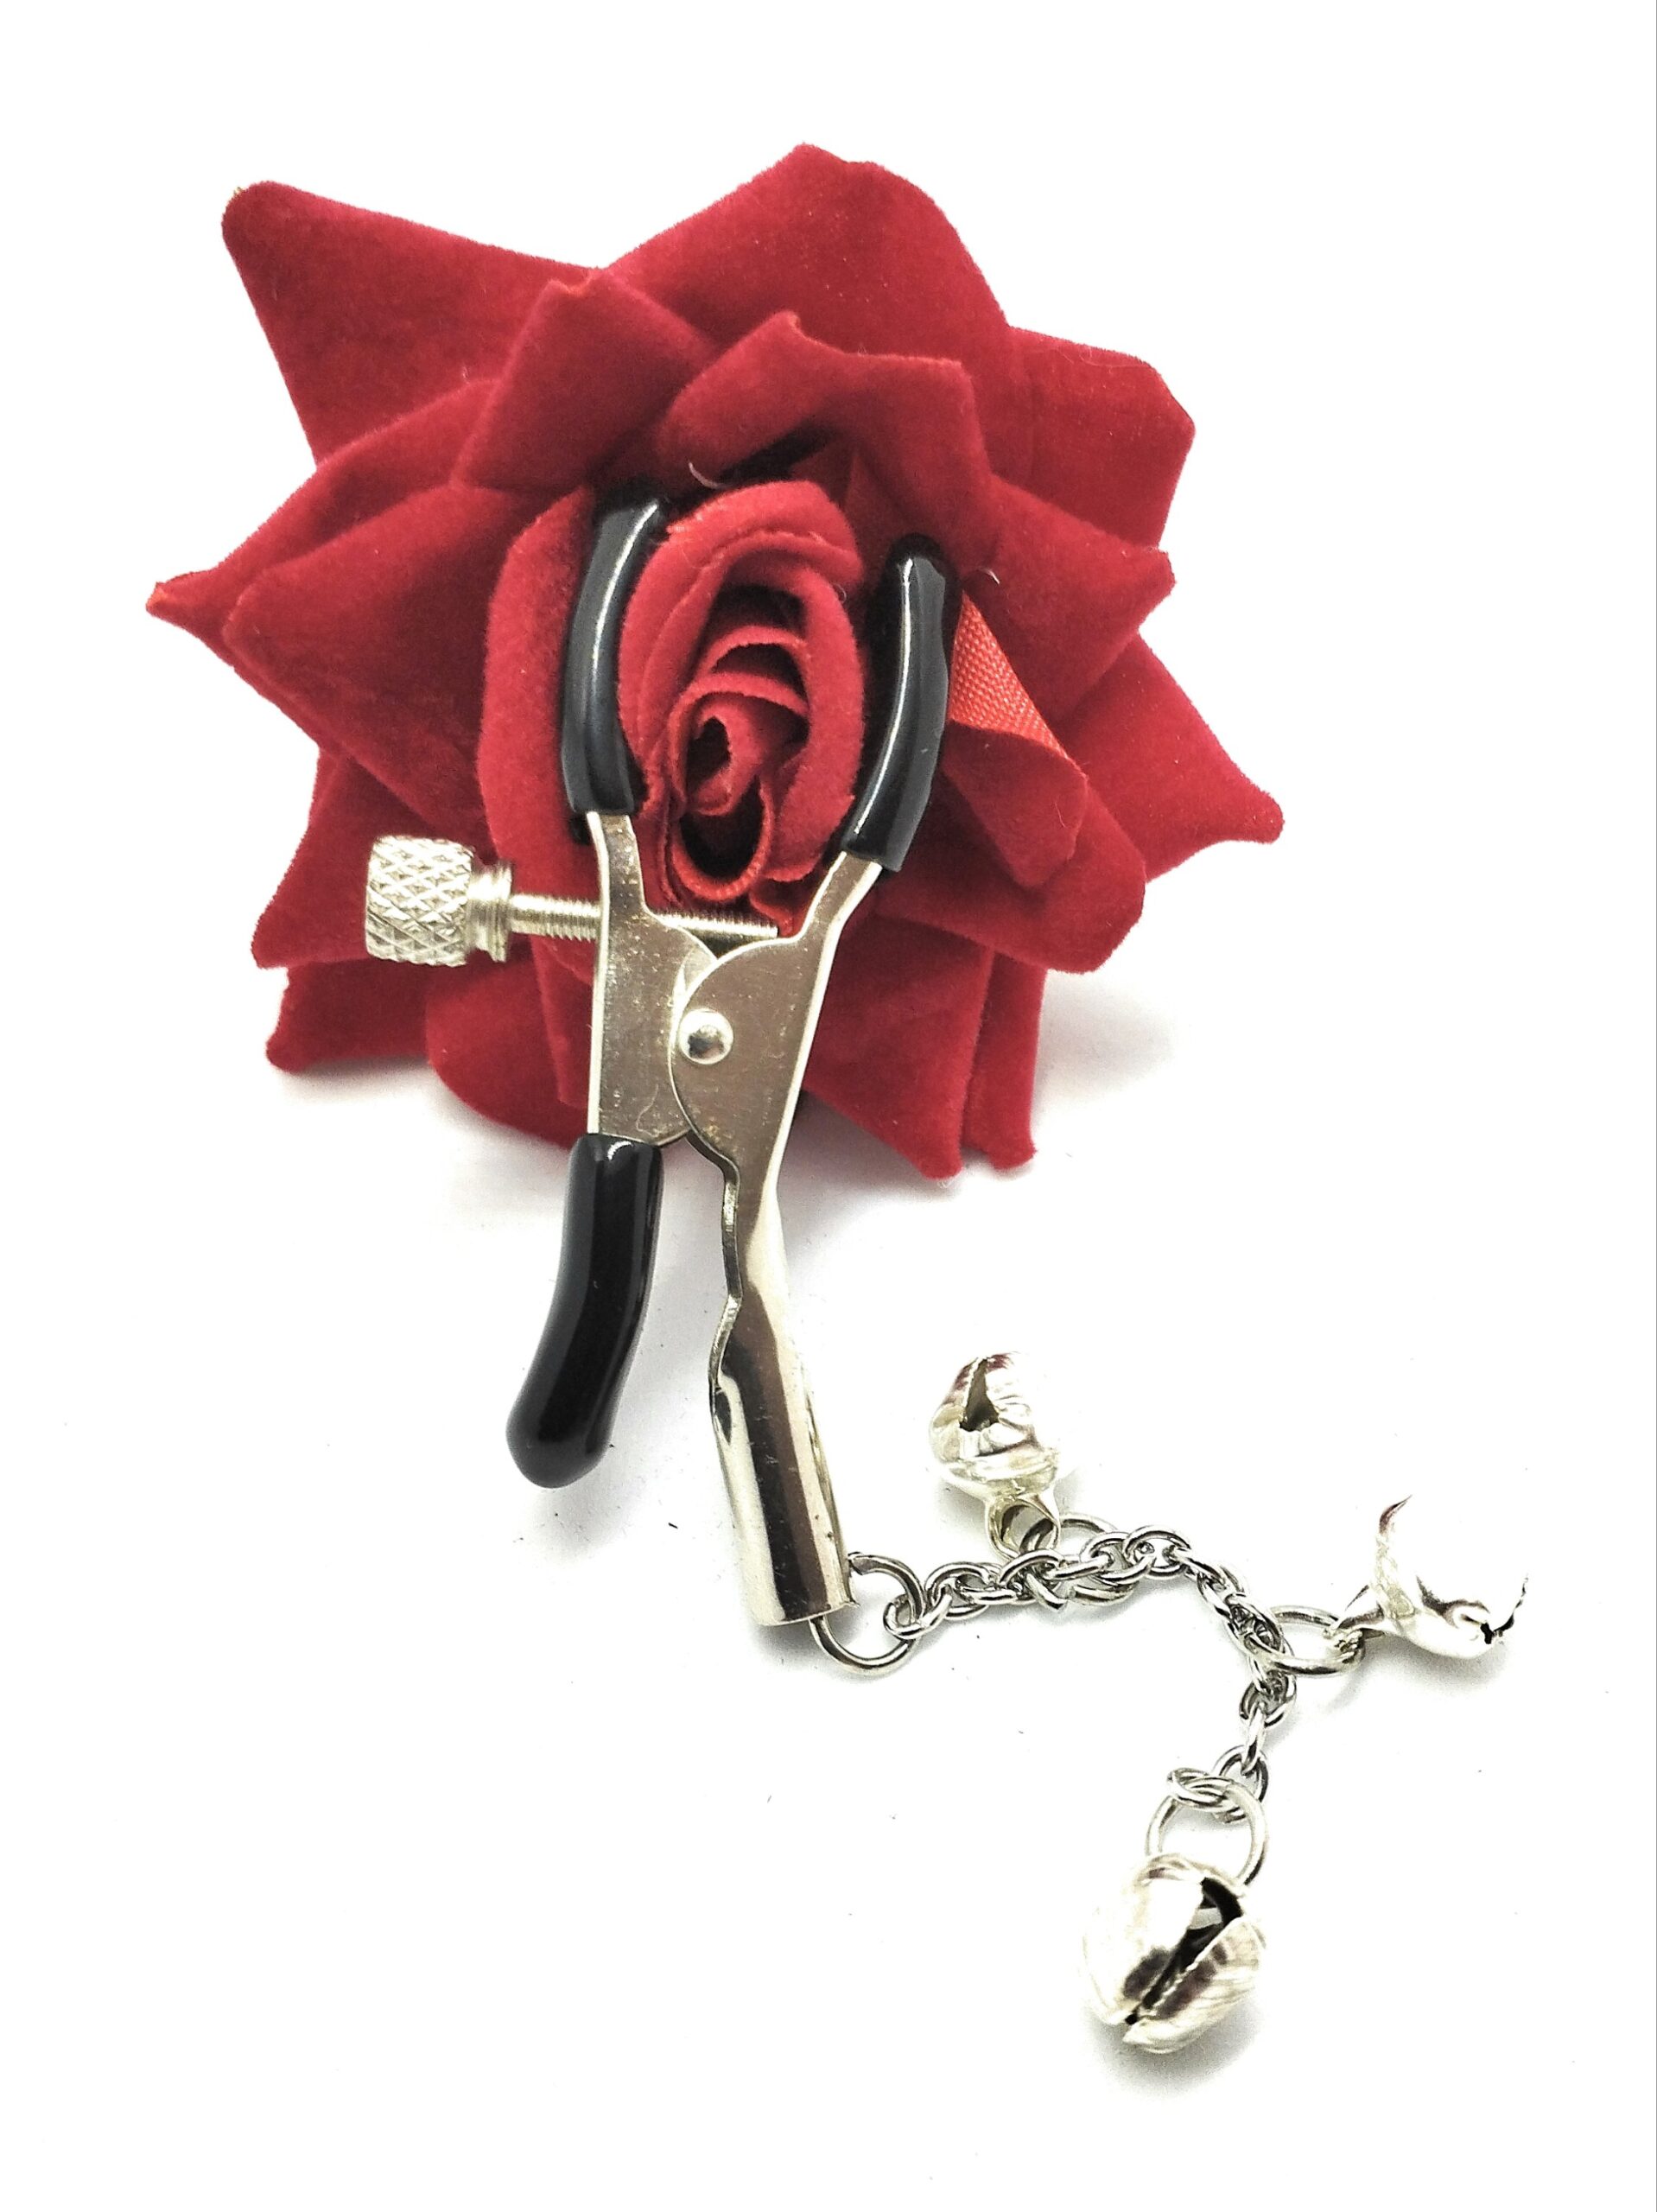 Clit Clamp Adjustable Non Piercing Labia Clip, Sexy Clitoral Jewelry with jingle Bells, Submissive Genital Jewelry BDSM